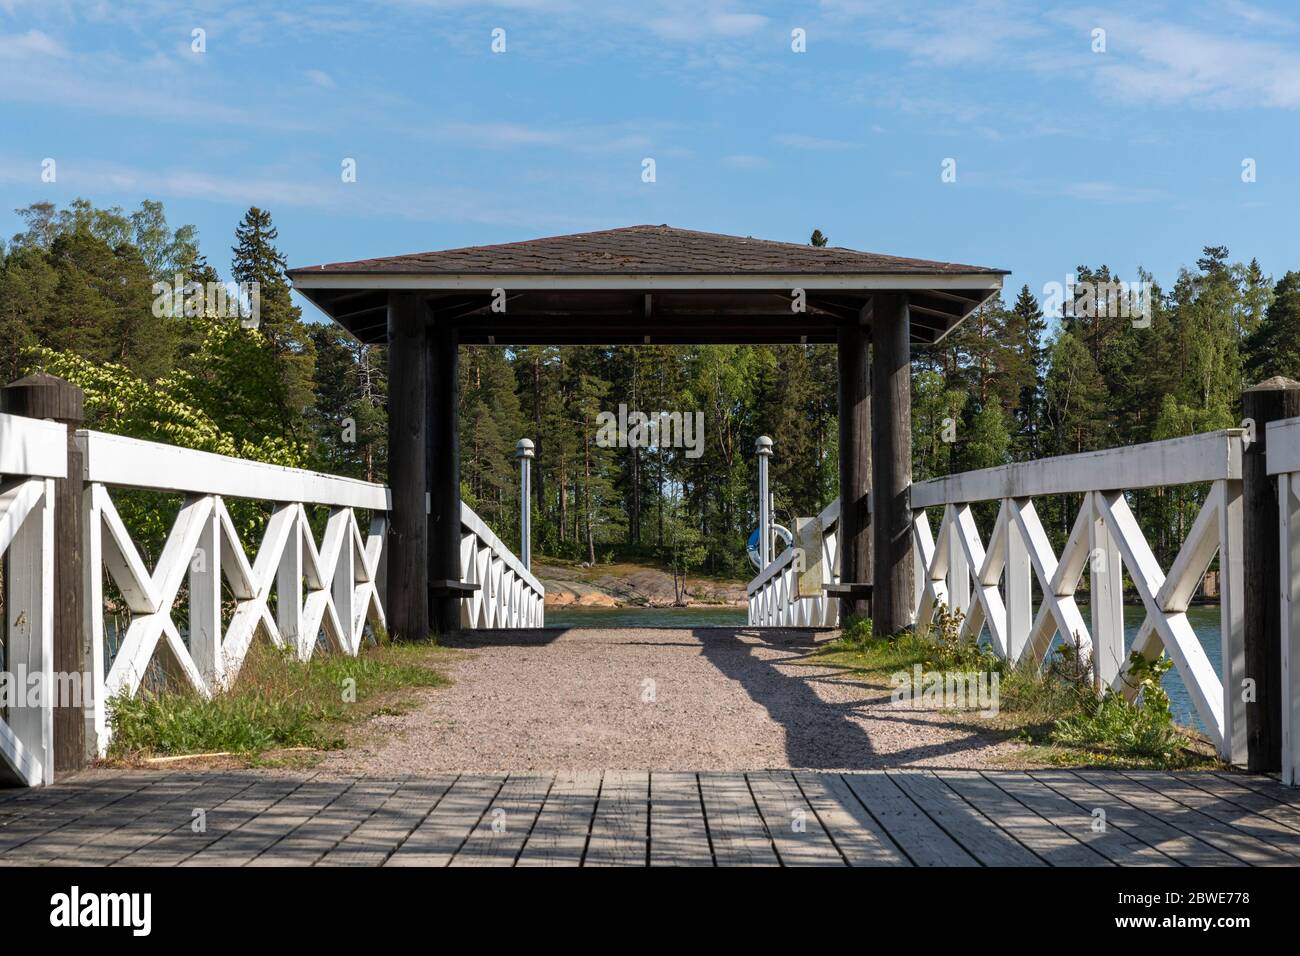 Classic Finnish pier and shelter in Espoo with no people in scene Stock Photo